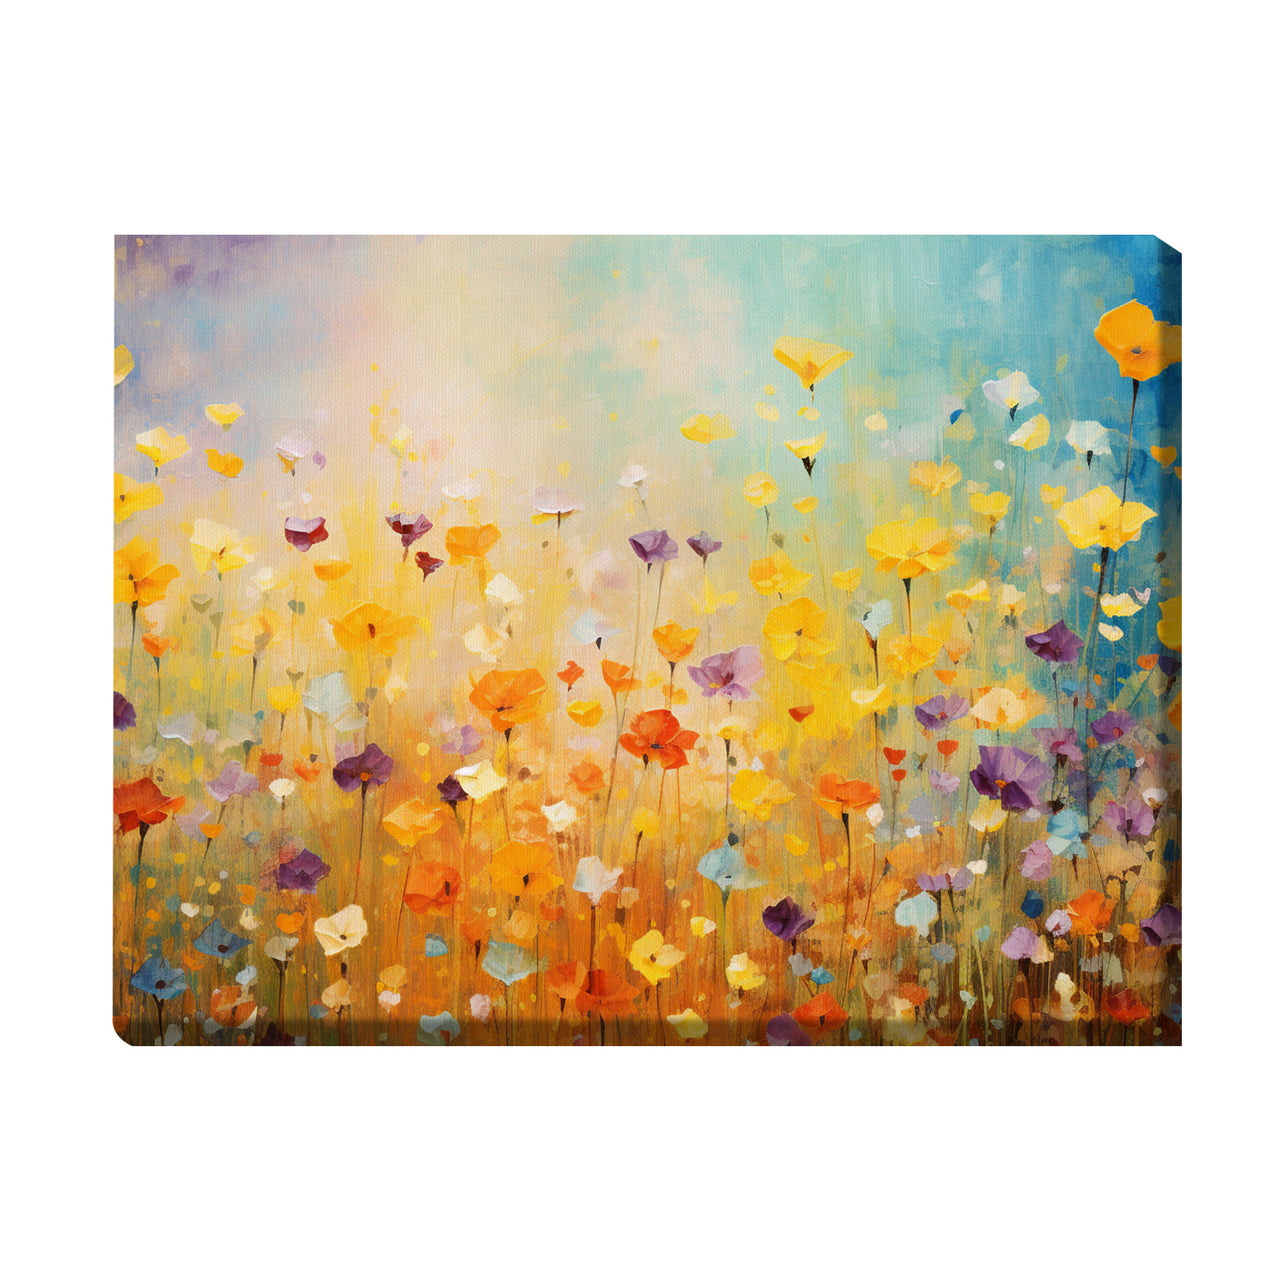 Wildflowers on Canvas, Colorful Wildflower Field Art Print 03, Minimalist Flower Wall Art, Abstract Wall Art, Watercolor flowers, Floral Print, Classic, Rustic Farmhouse, Wildflower Home Decor, Flower Painting Canvas, Floral Wall Art